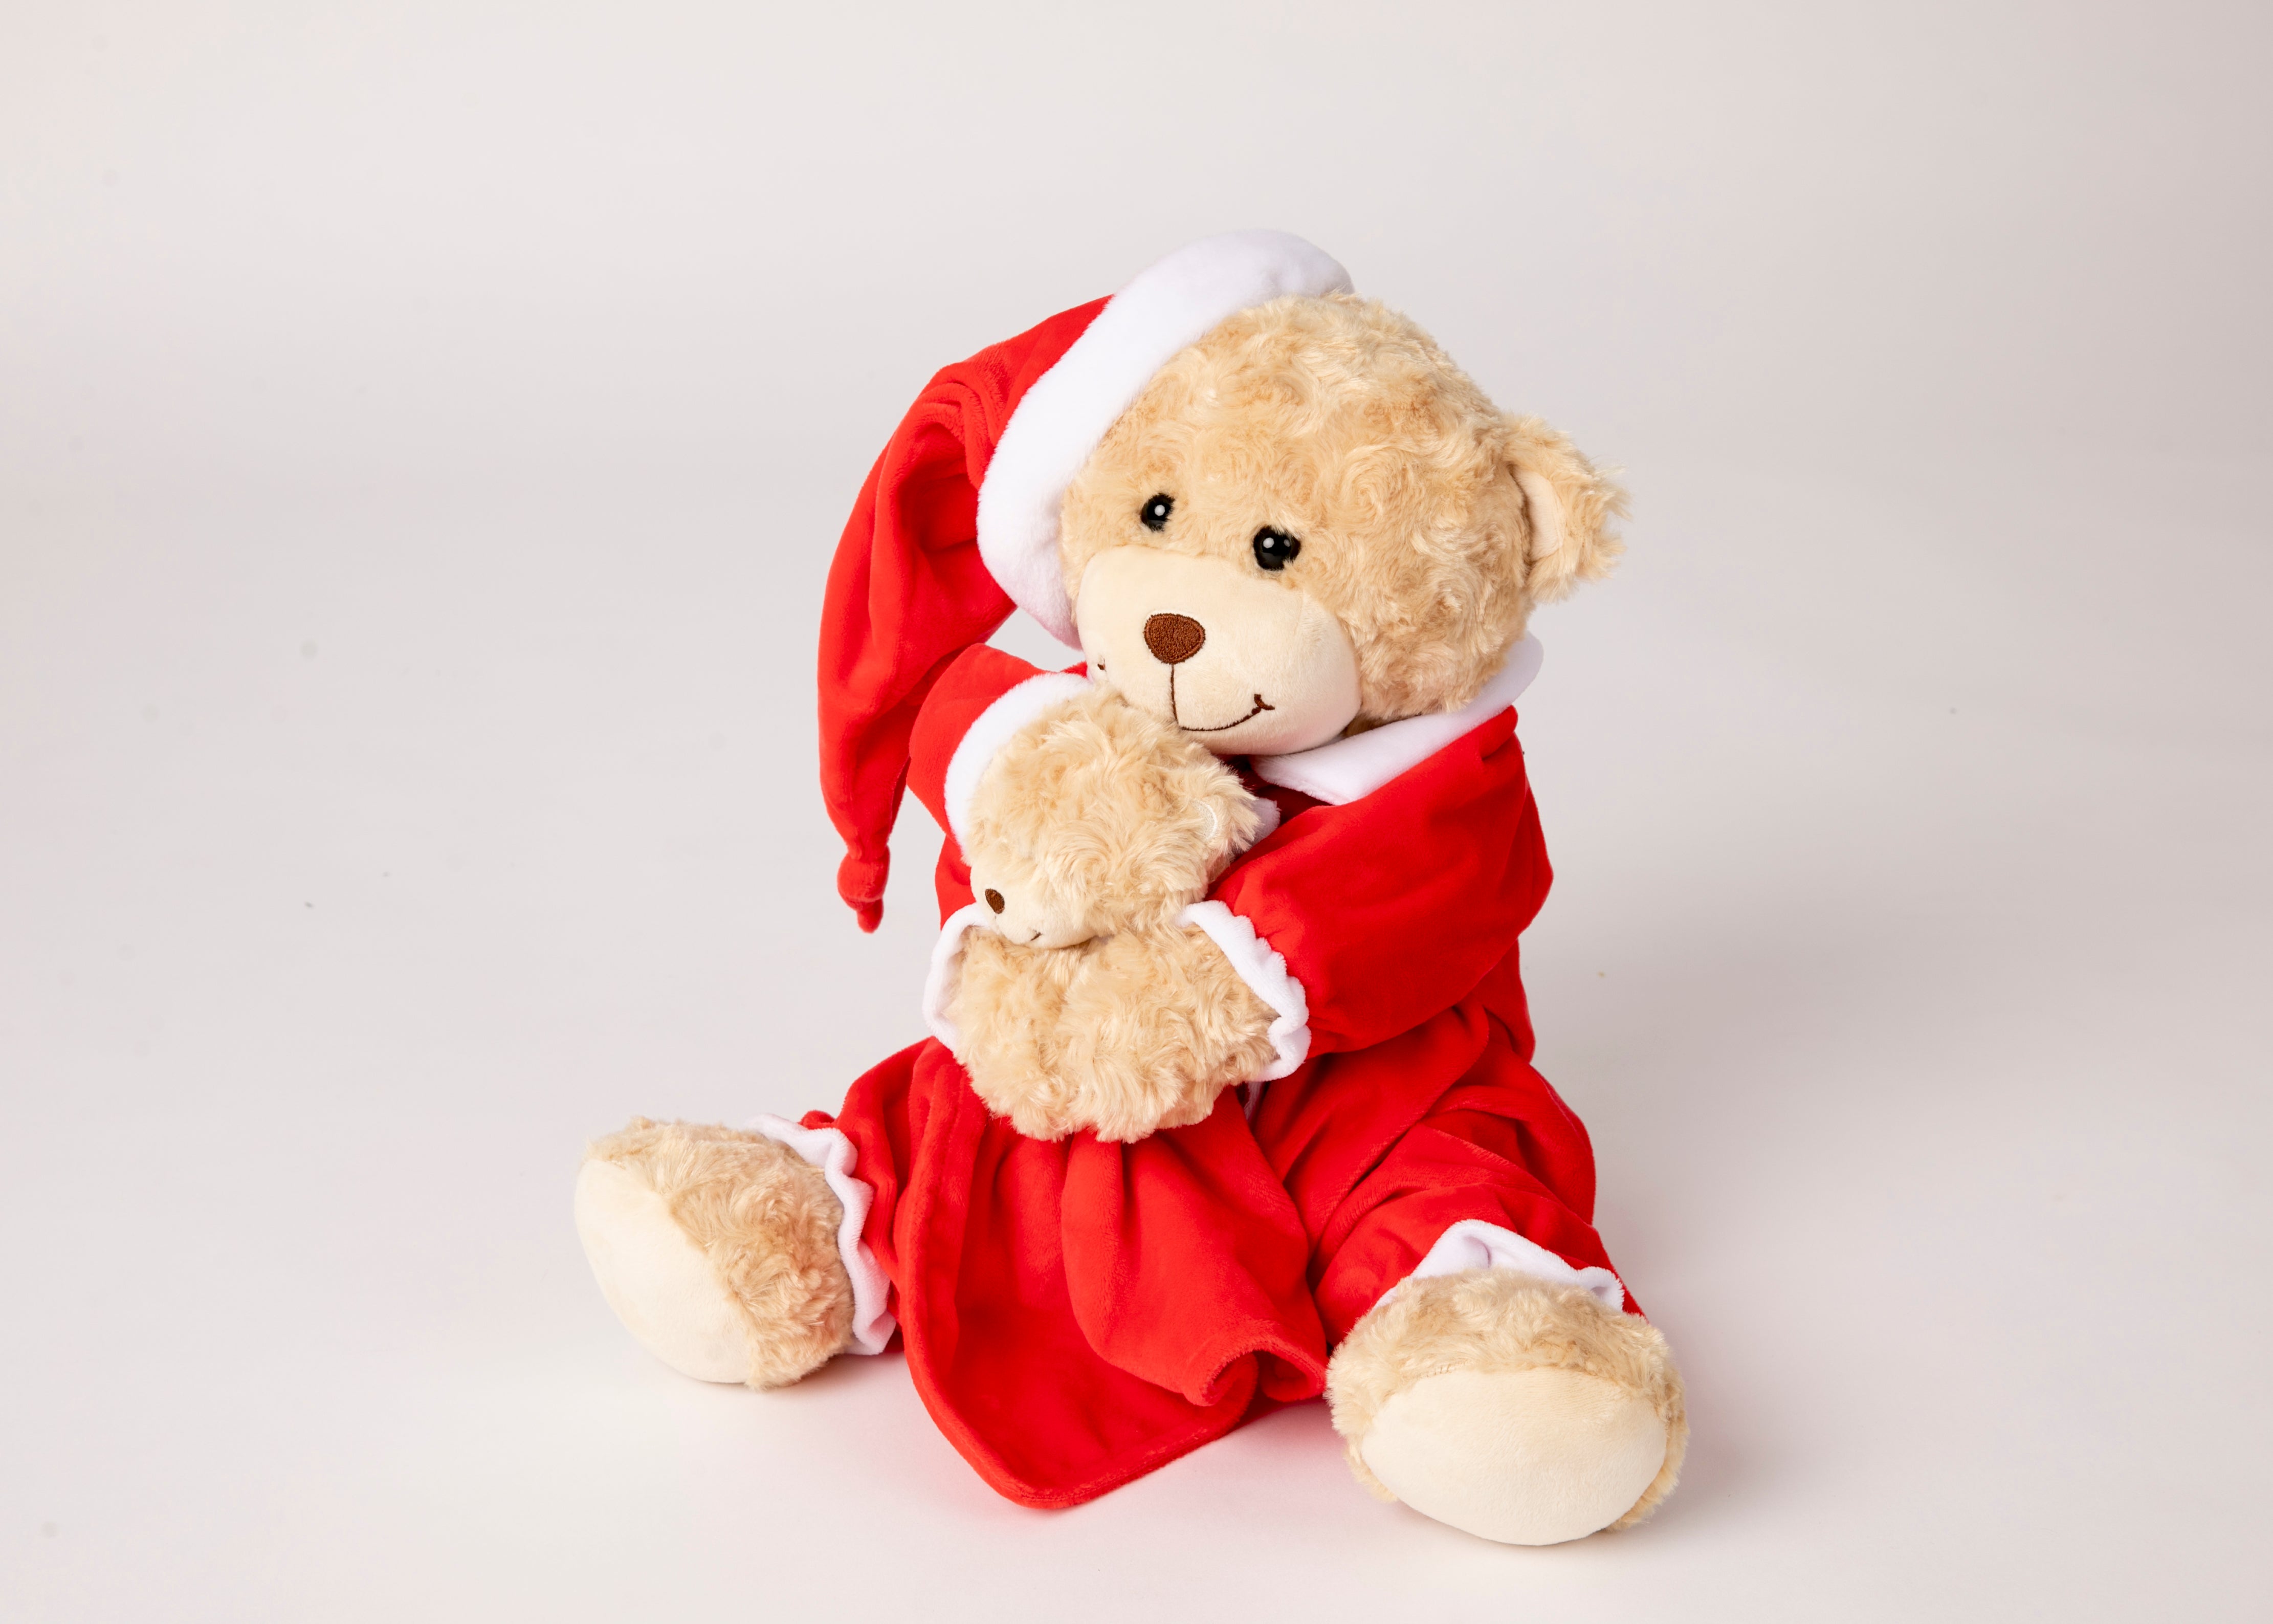 White robe and Red & white striped Christmas pyjamas & Teddy and comfortor & Gift box